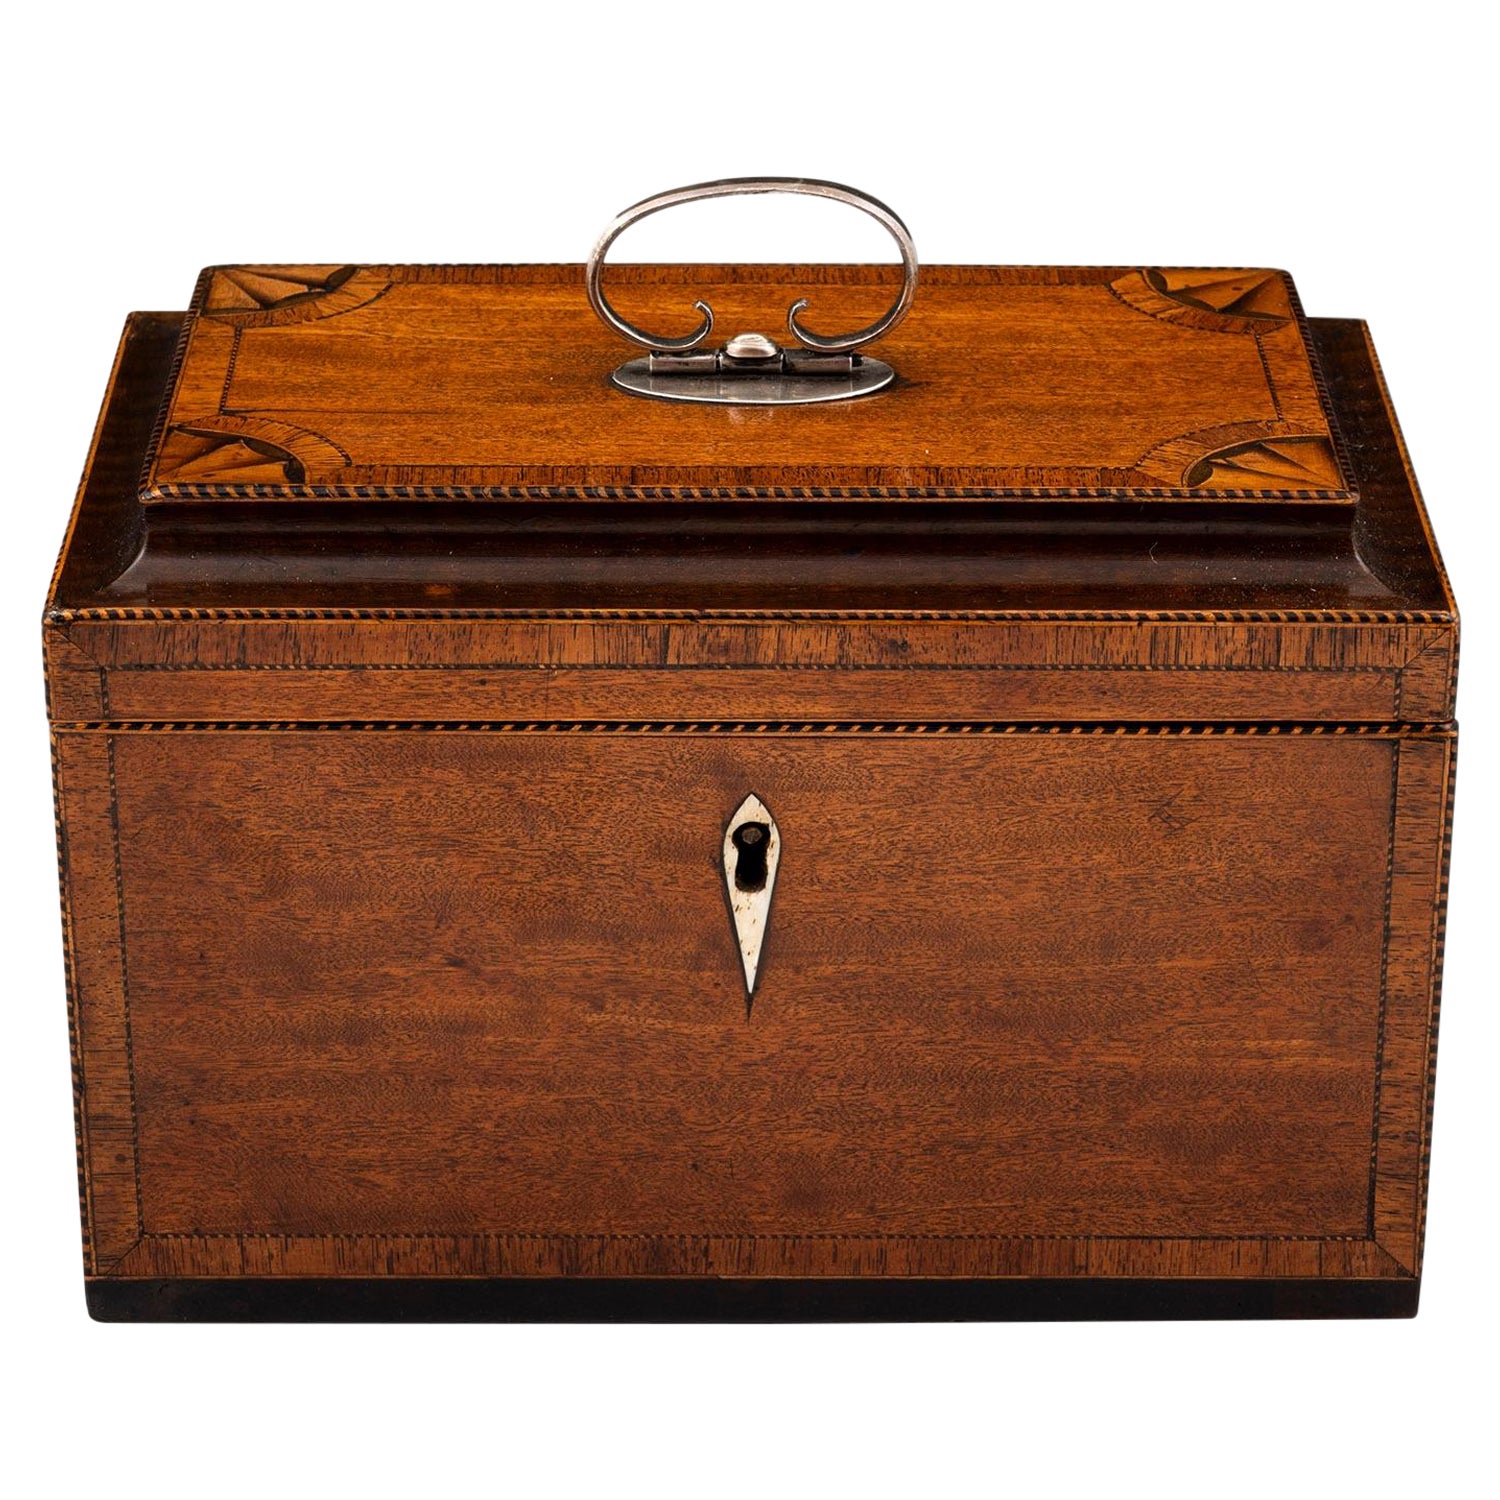 Georgian Satinwood Tea Chest with Secret Compartments